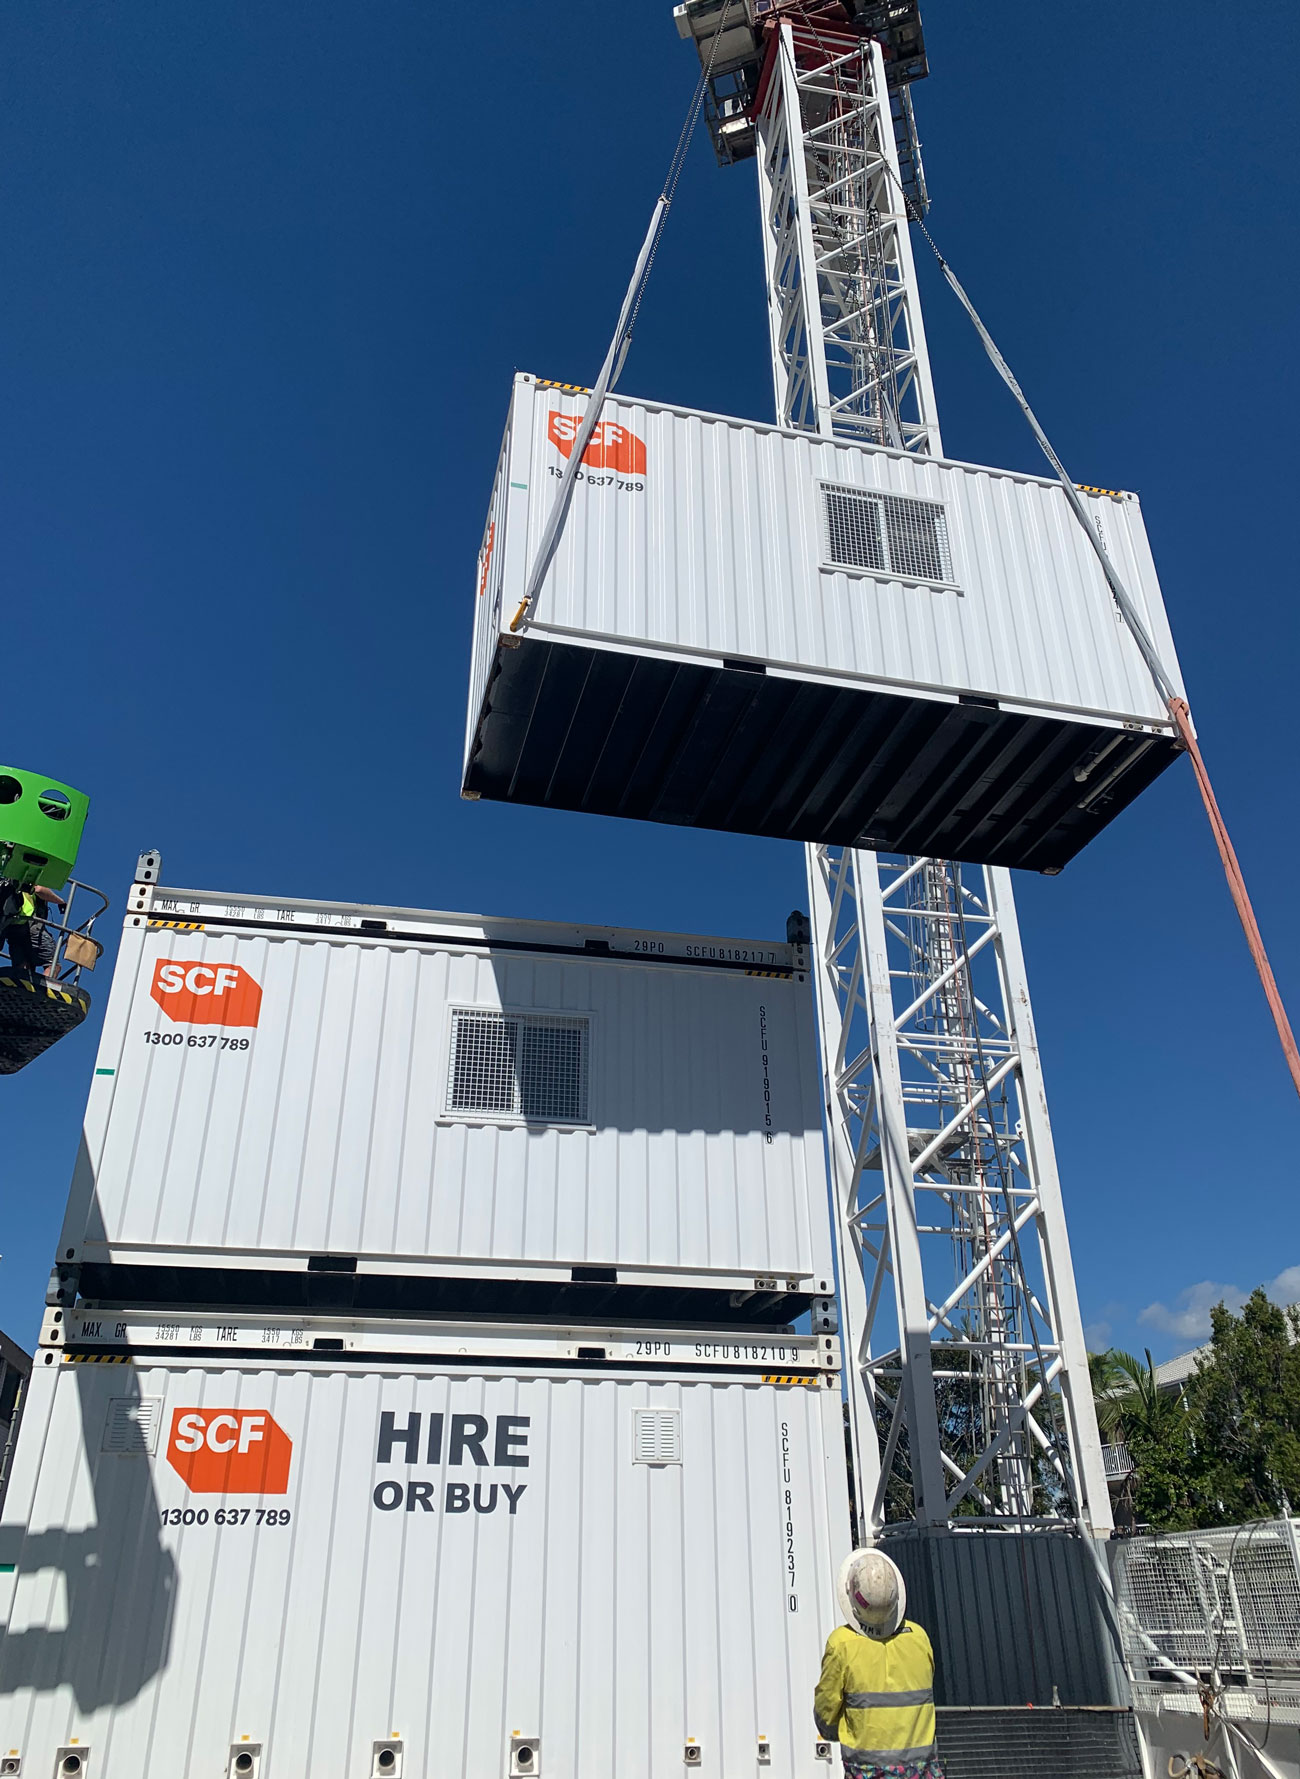 Stage 1 Install - The third level Site Shed is moved into place. This triple stack was required due to space limitations on site.